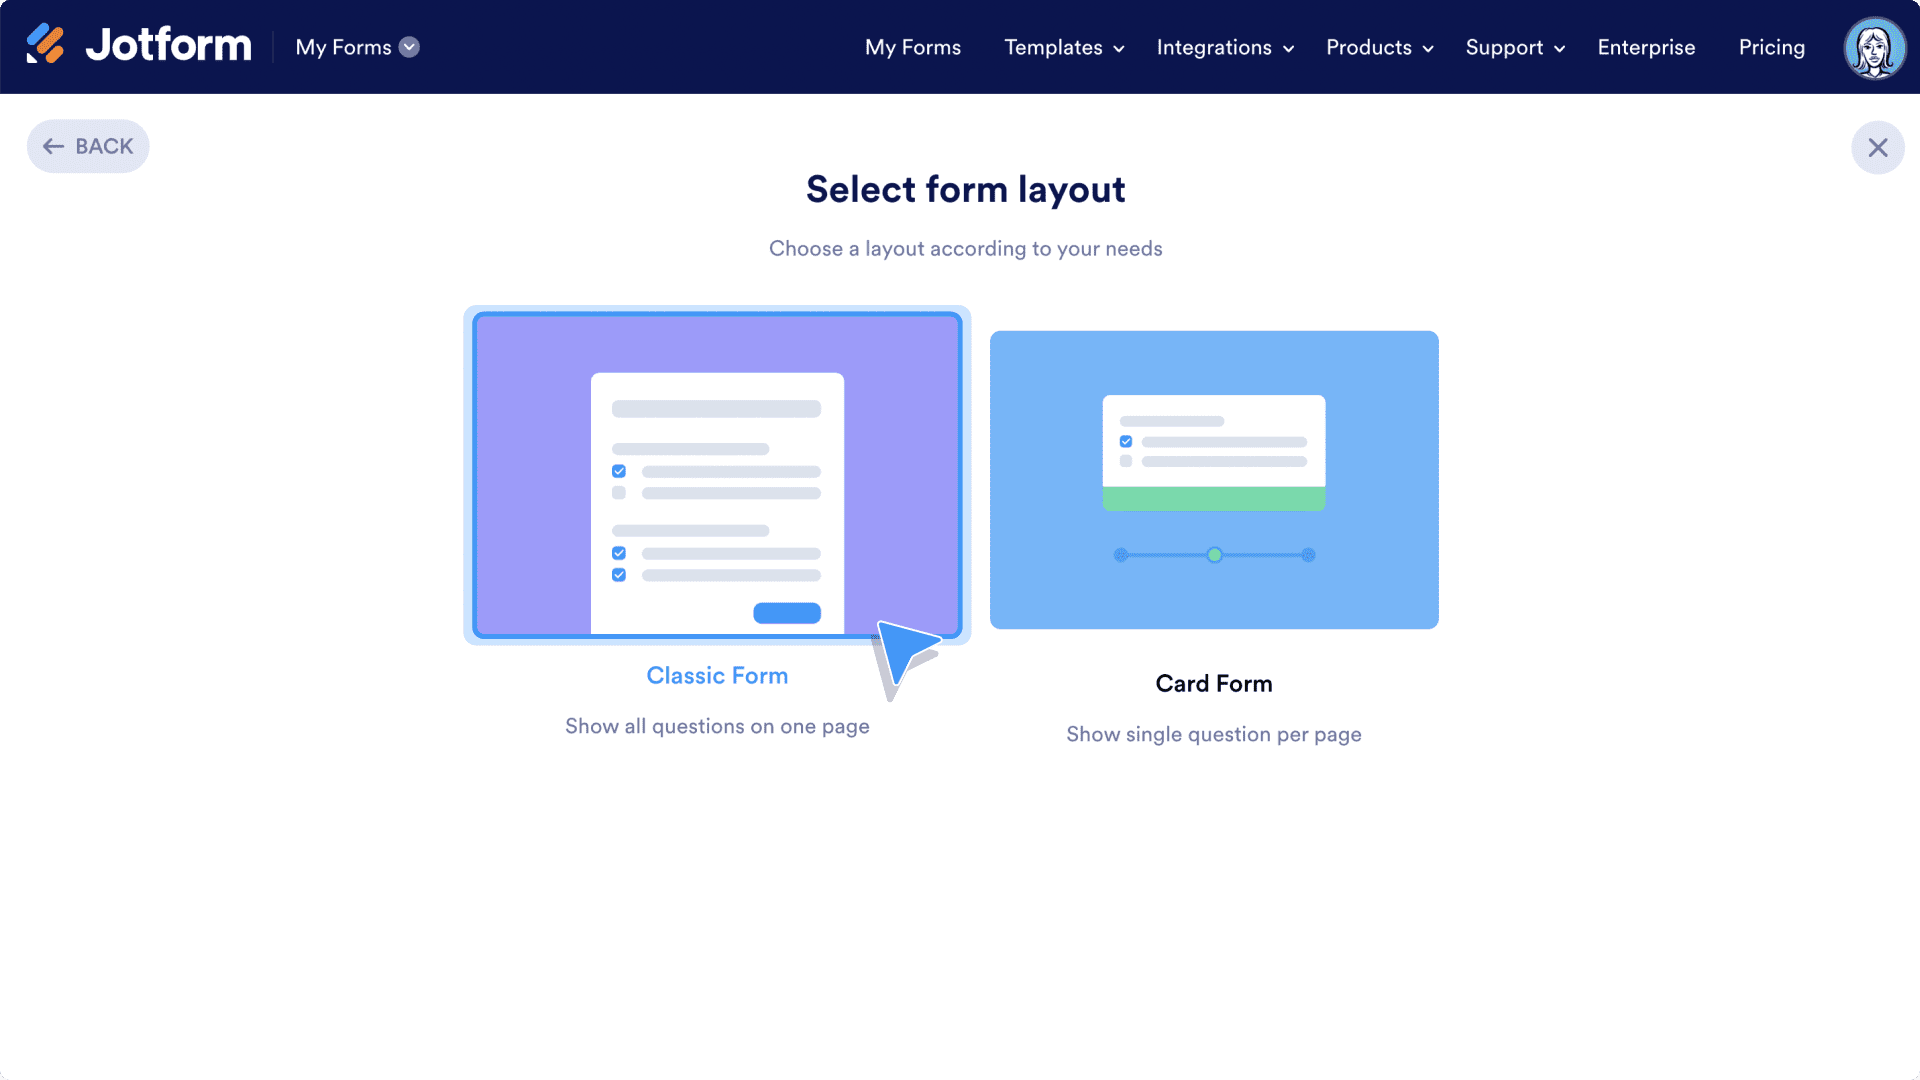 Select form layout